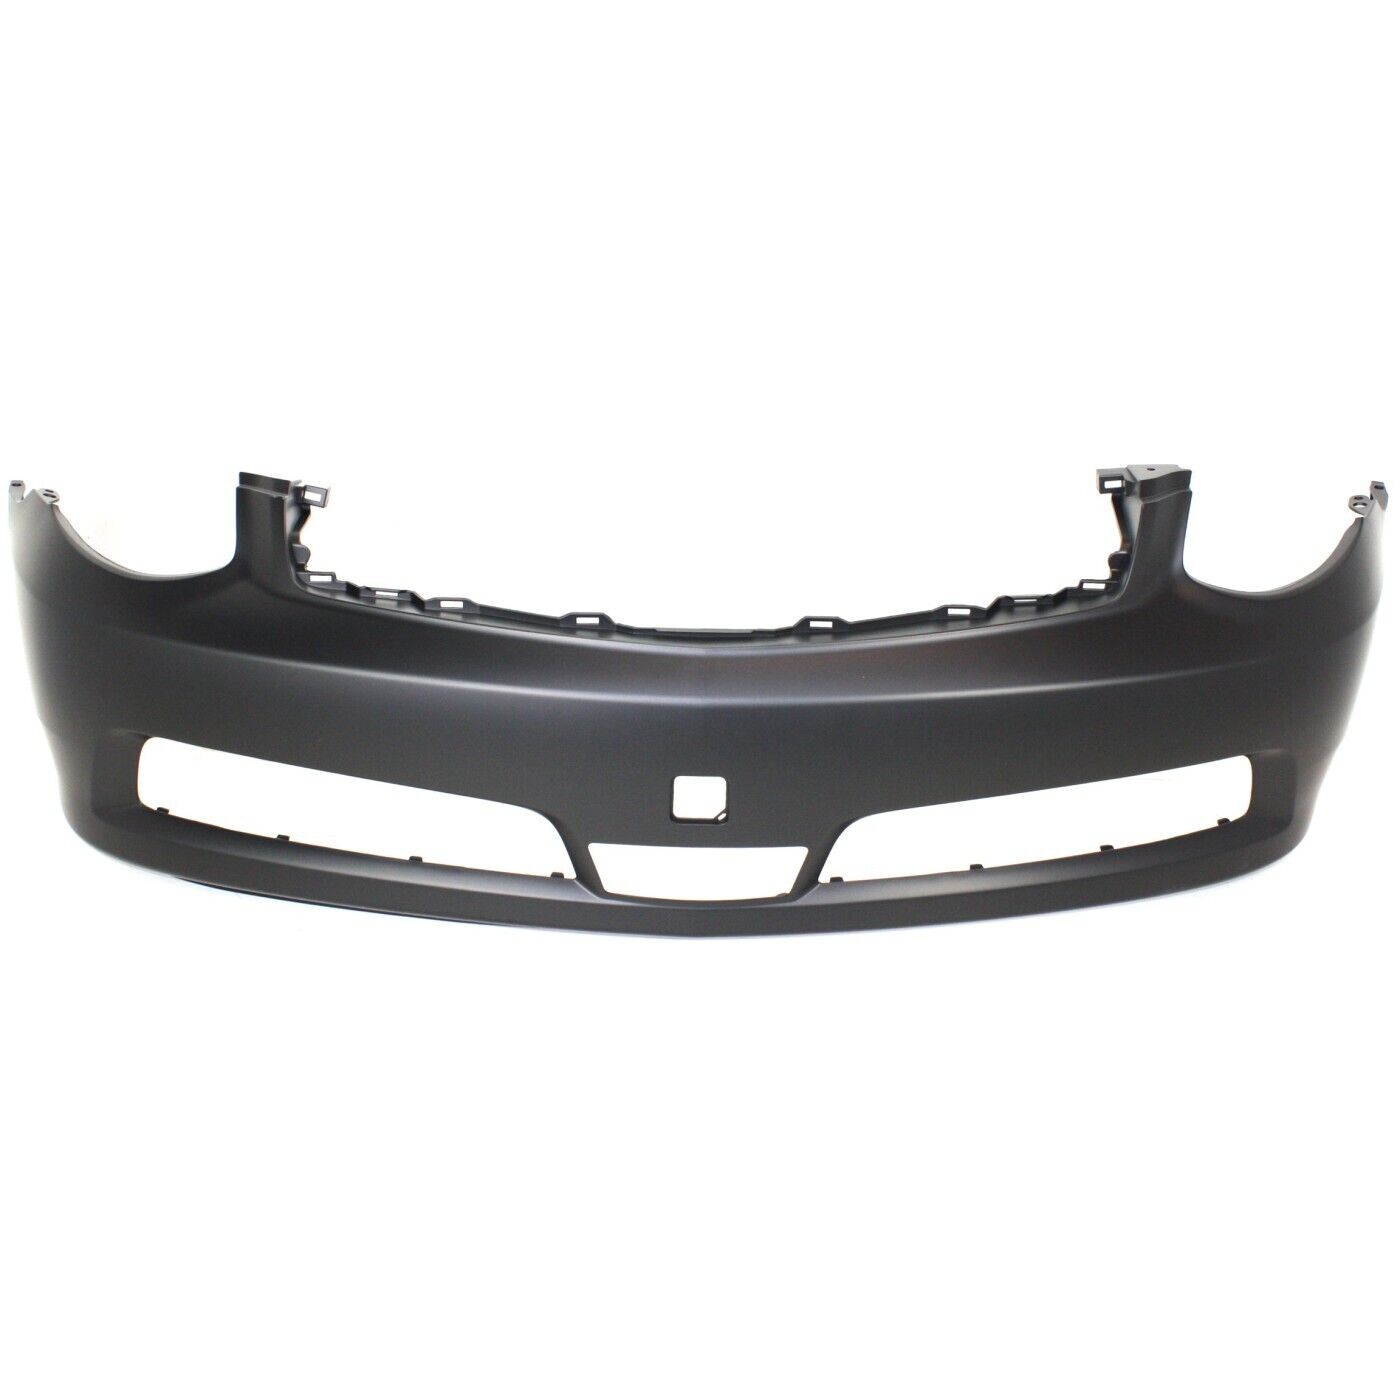 Front Bumper Cover For 2005-2006 Infiniti G35 Primed